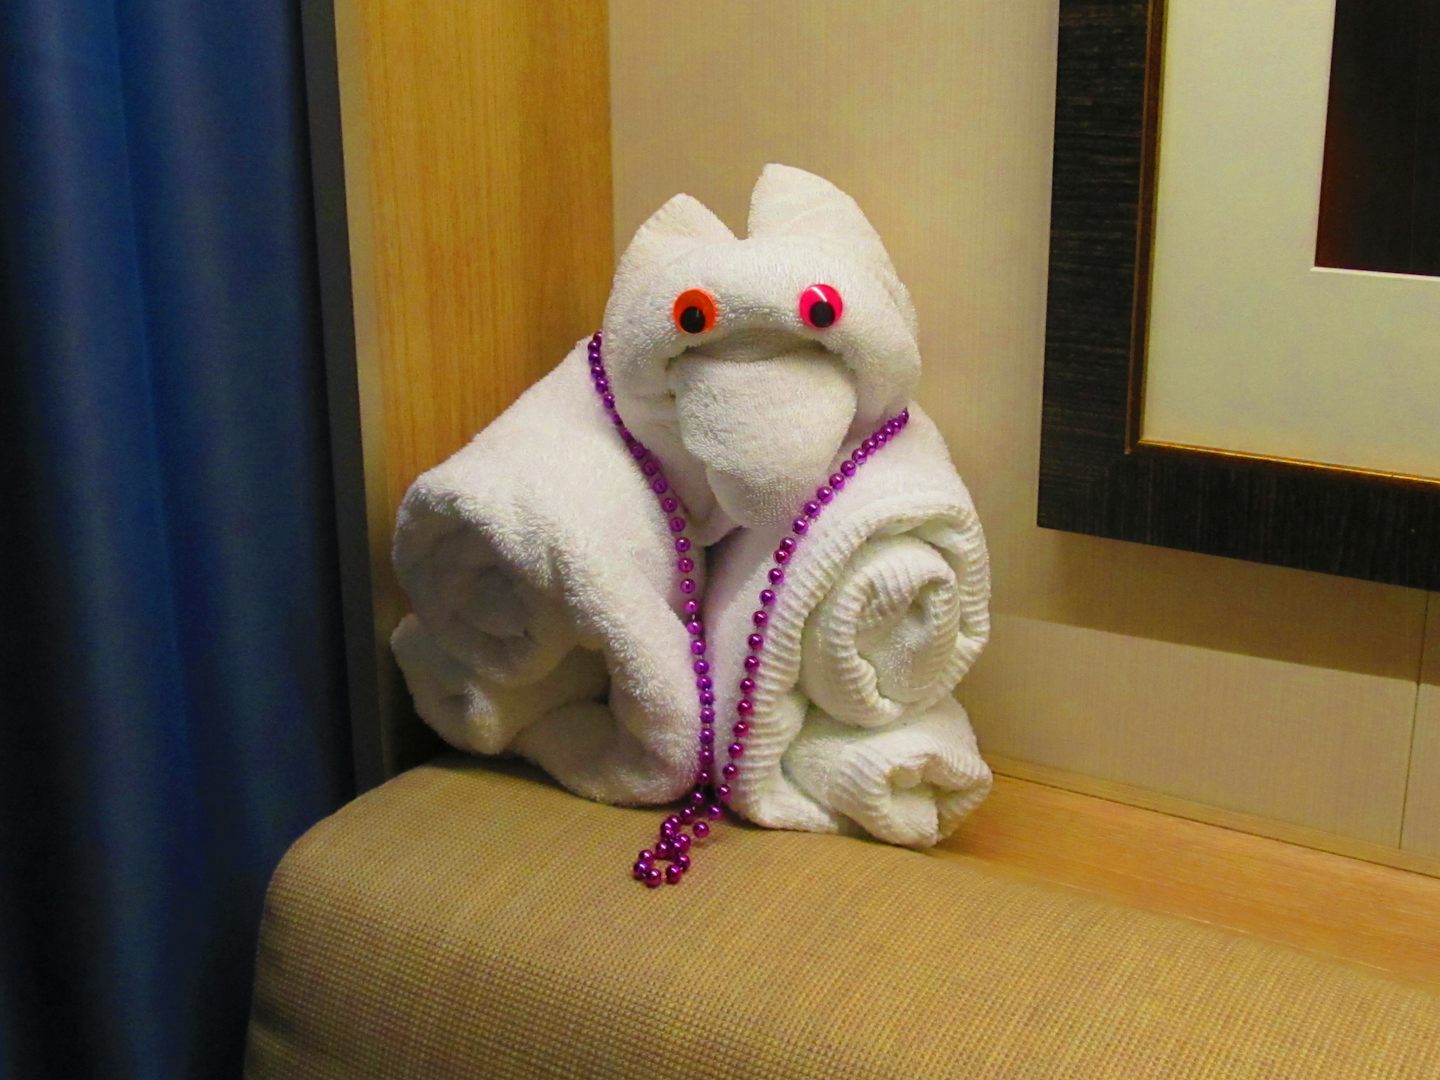 another towel animal